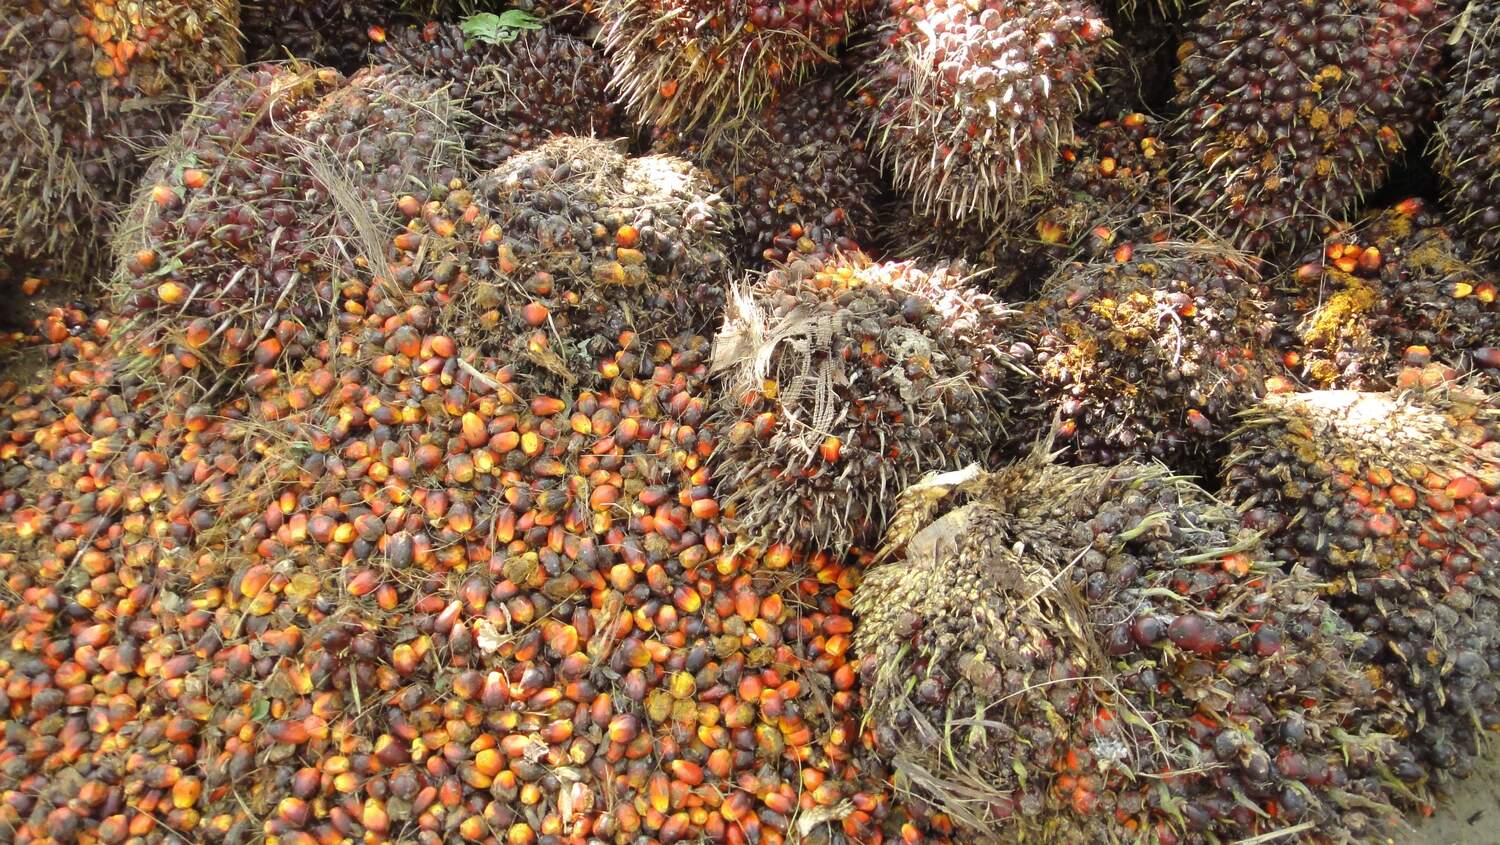 Harvested oil palm fruit bunches